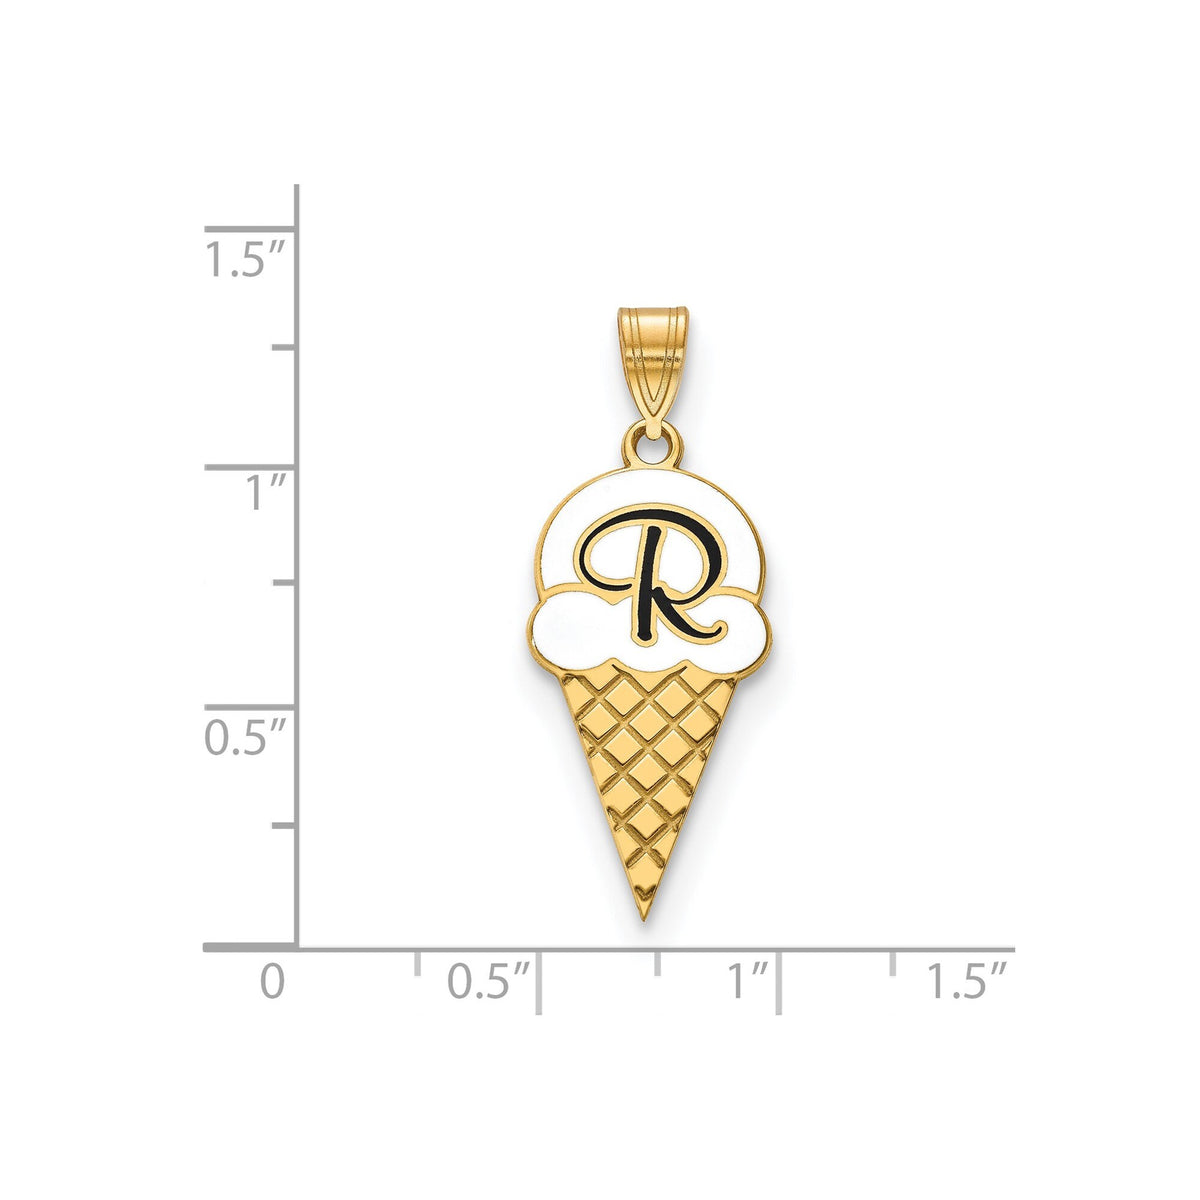 Personalized Ice Cream Cone Pendant with Necklace in Sterling Silver or Gold Plated Sterling Silver - Gift Box Included - Made in USA